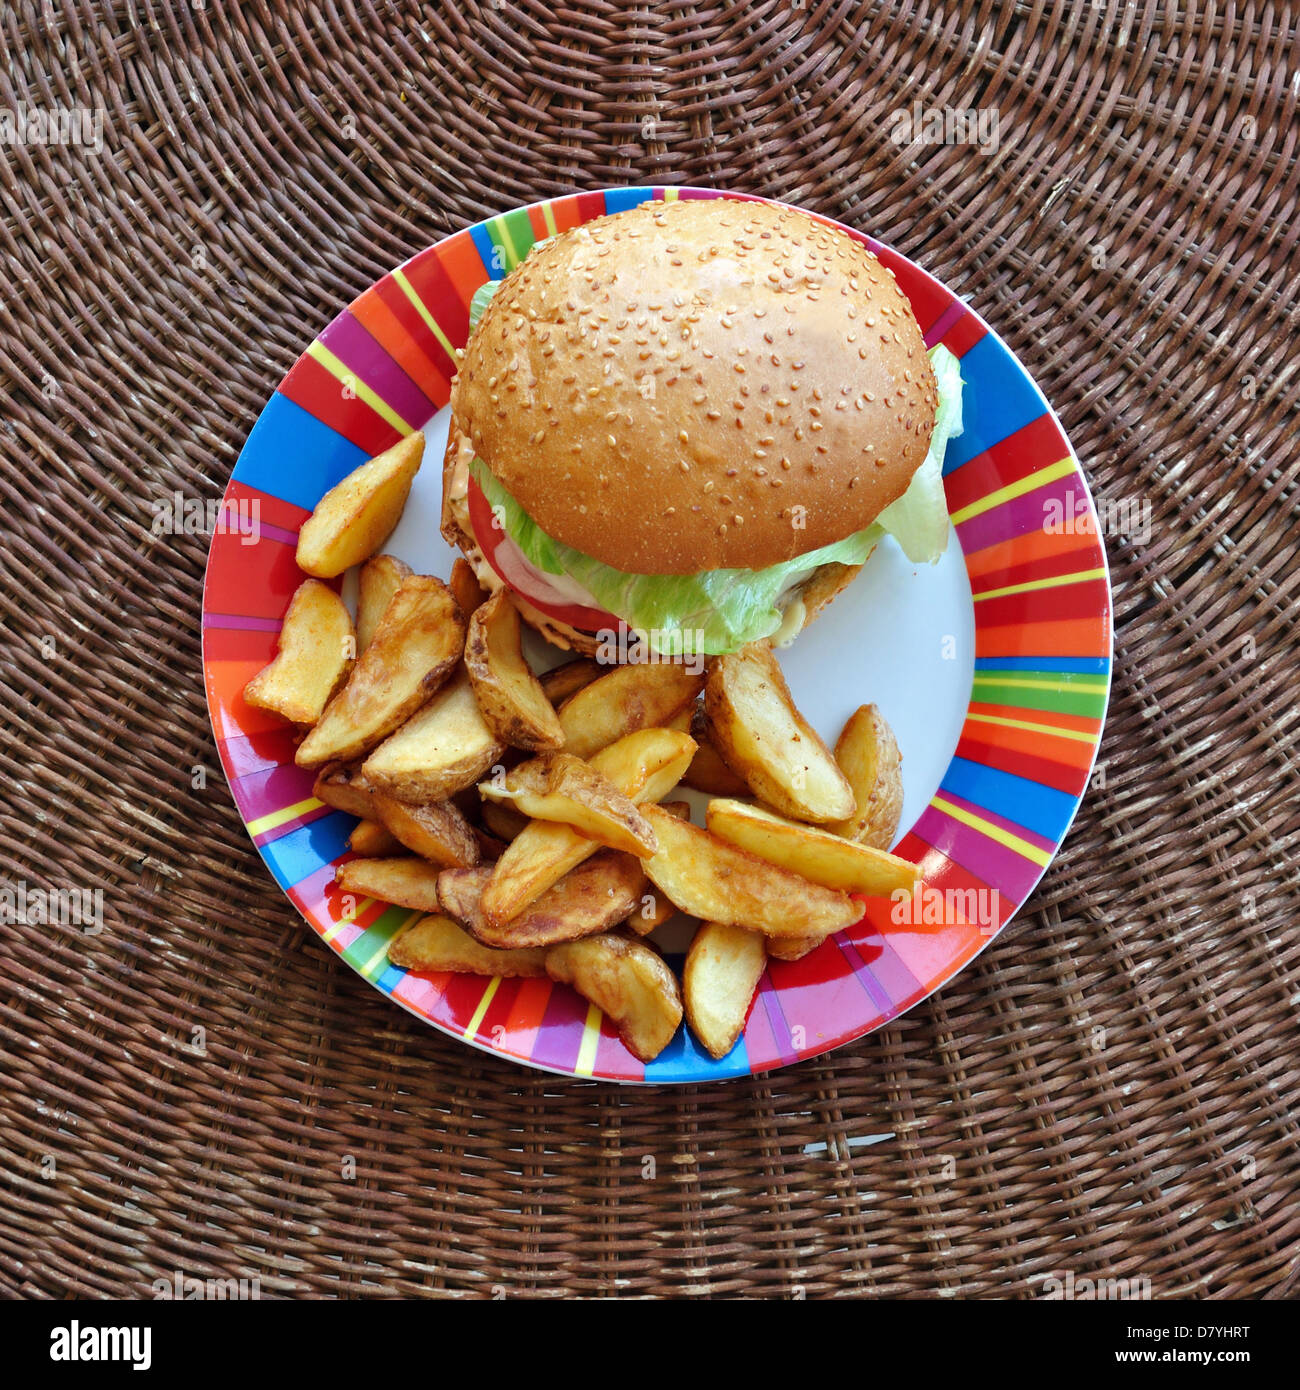 Cheeseburger and fries dish. Fast food background. Stock Photo